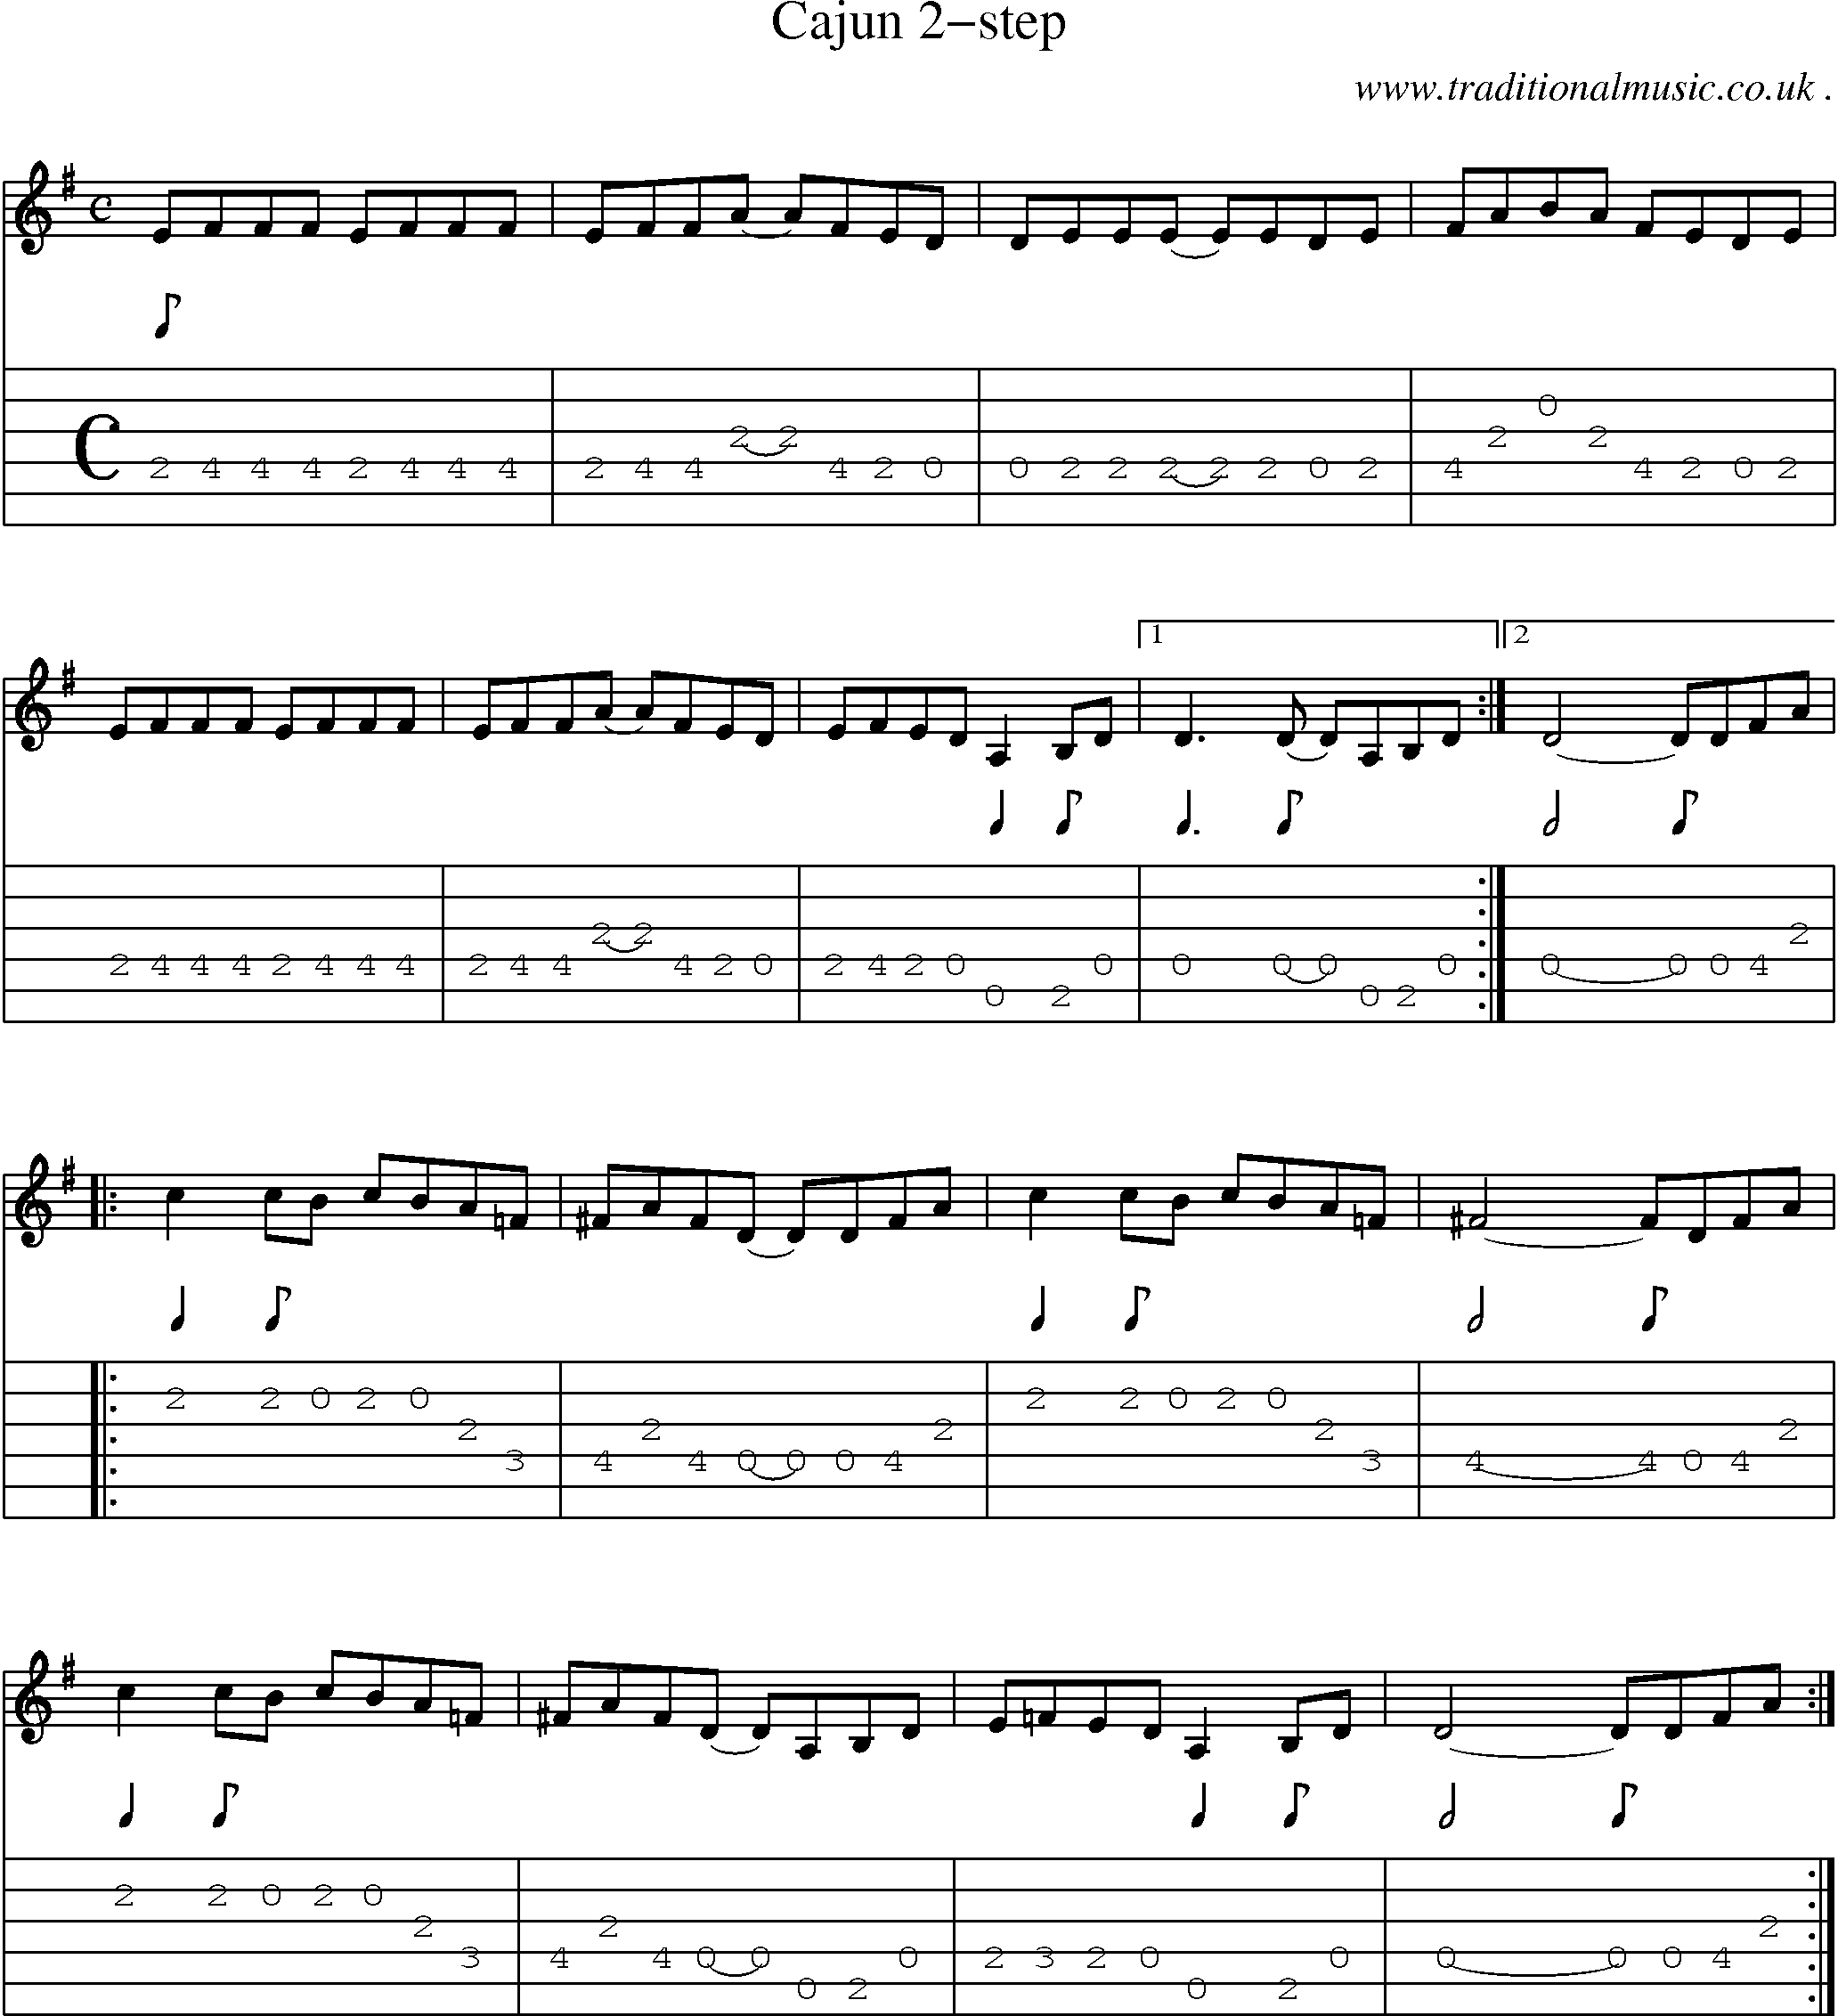 Music Score and Guitar Tabs for Cajun 2-step